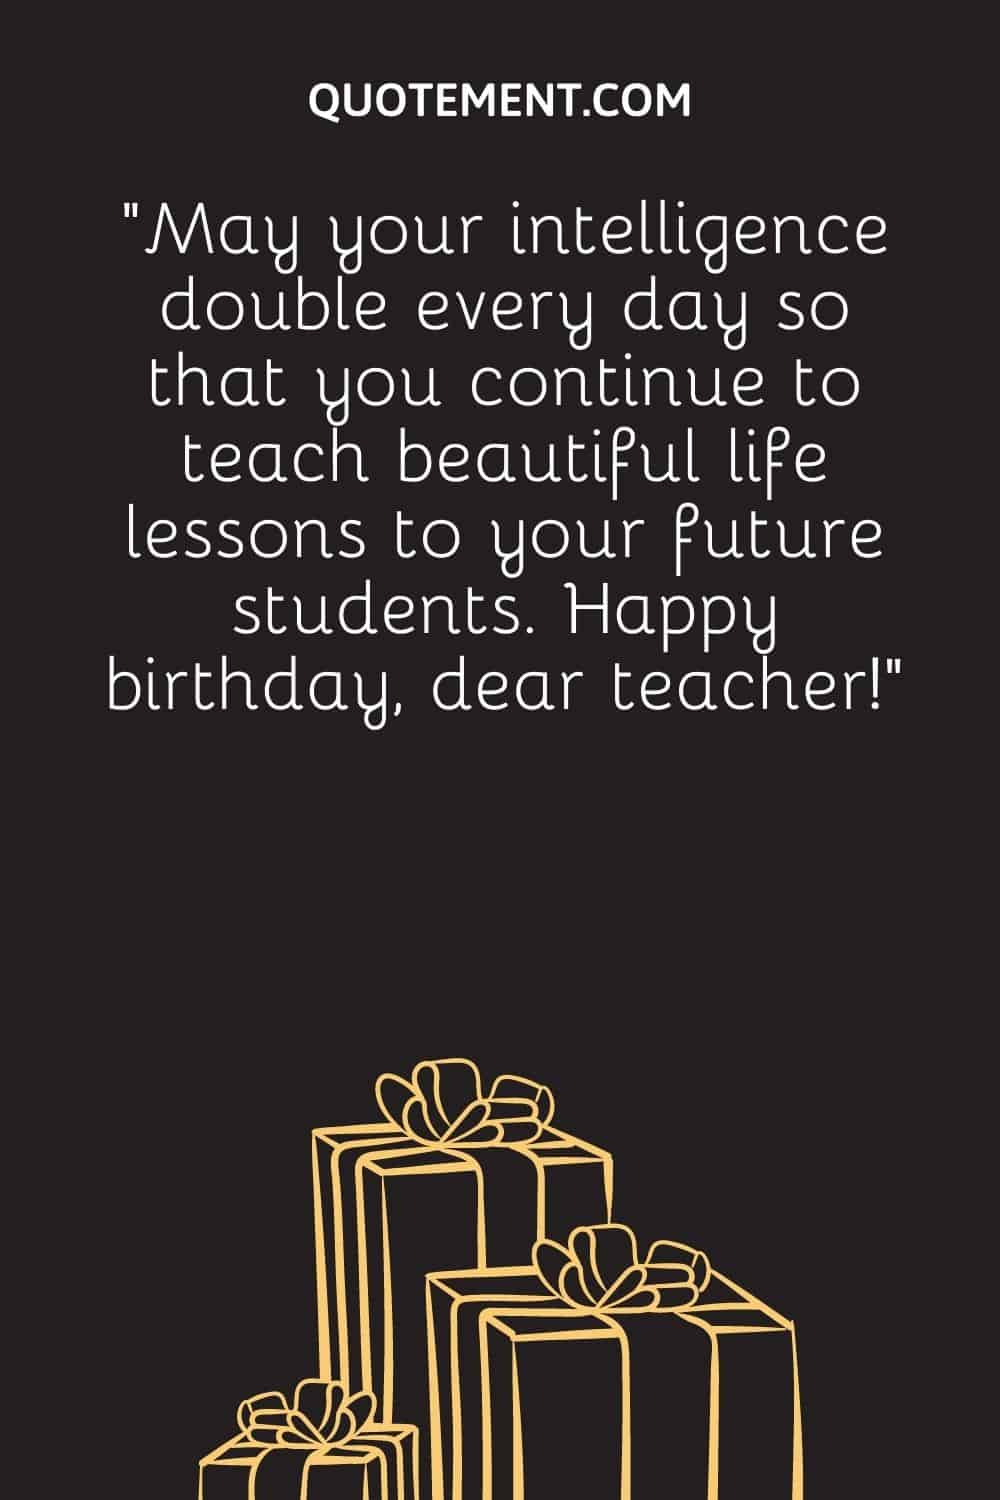 “May your intelligence double every day so that you continue to teach beautiful life lessons to your future students. Happy birthday, dear teacher!”